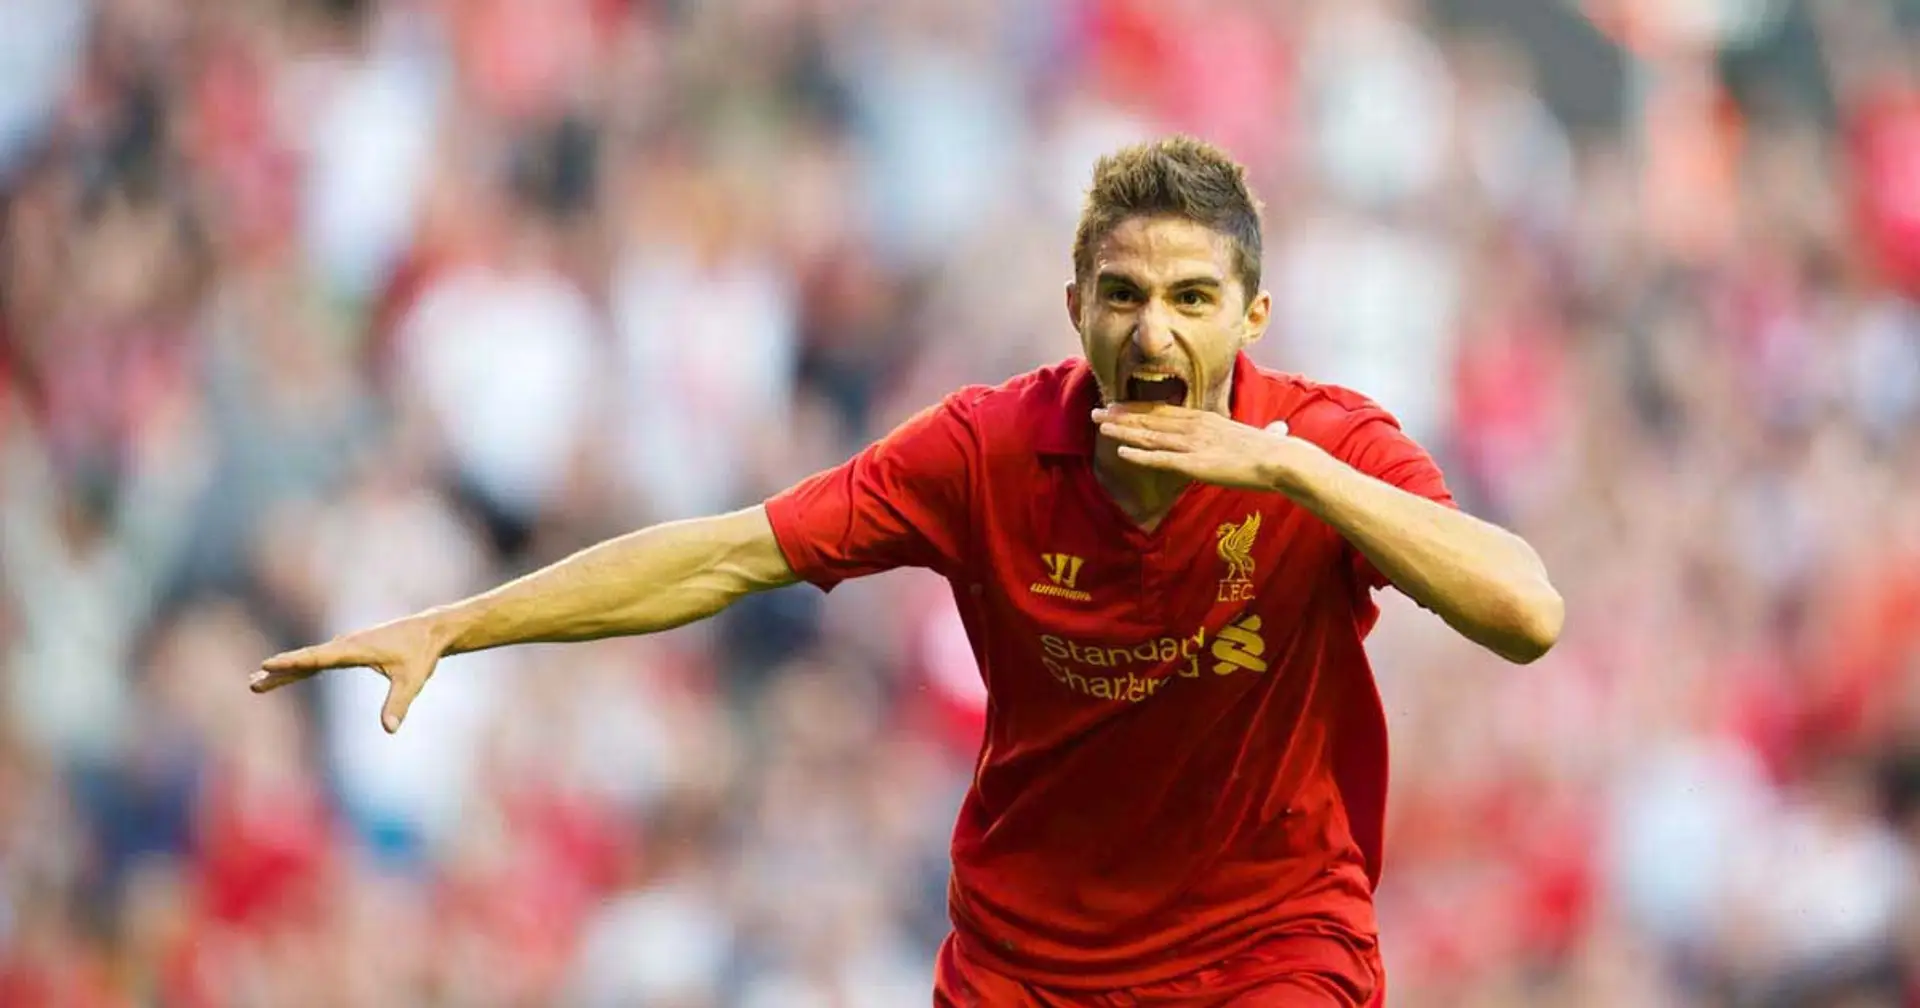 Ex-Red Fabio Borini reveals his bizarre but beautiful dream of becoming an architect: 'My idea is to design training centres'